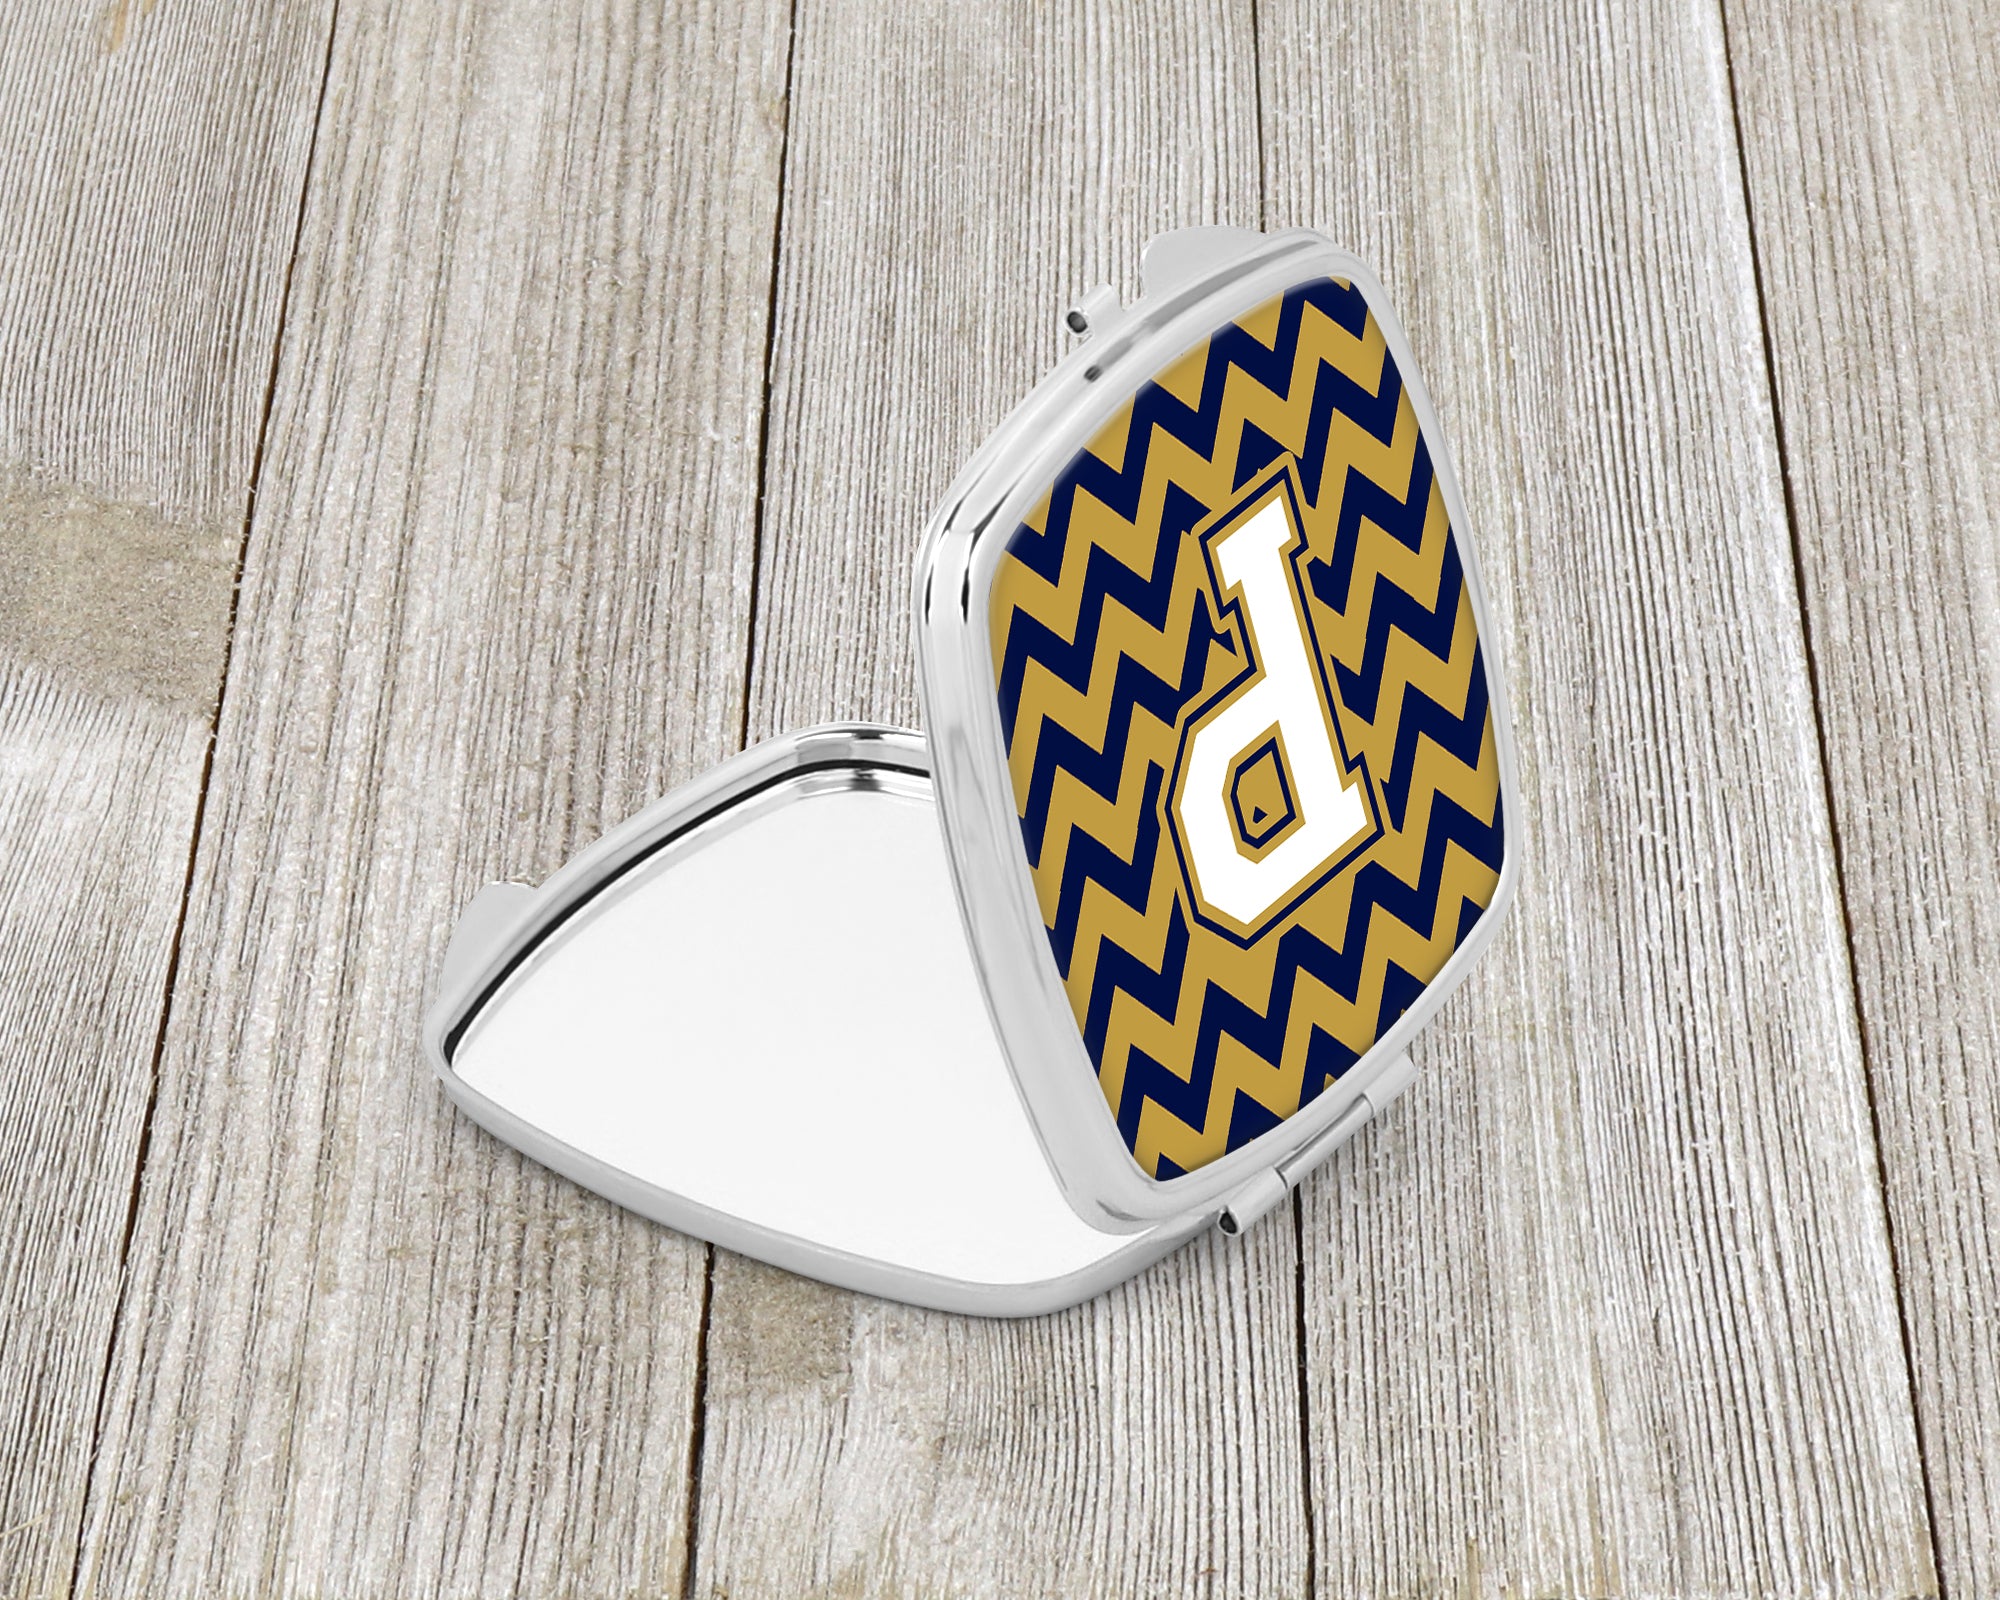 Letter P Chevron Navy Blue and Gold Compact Mirror CJ1057-PSCM  the-store.com.